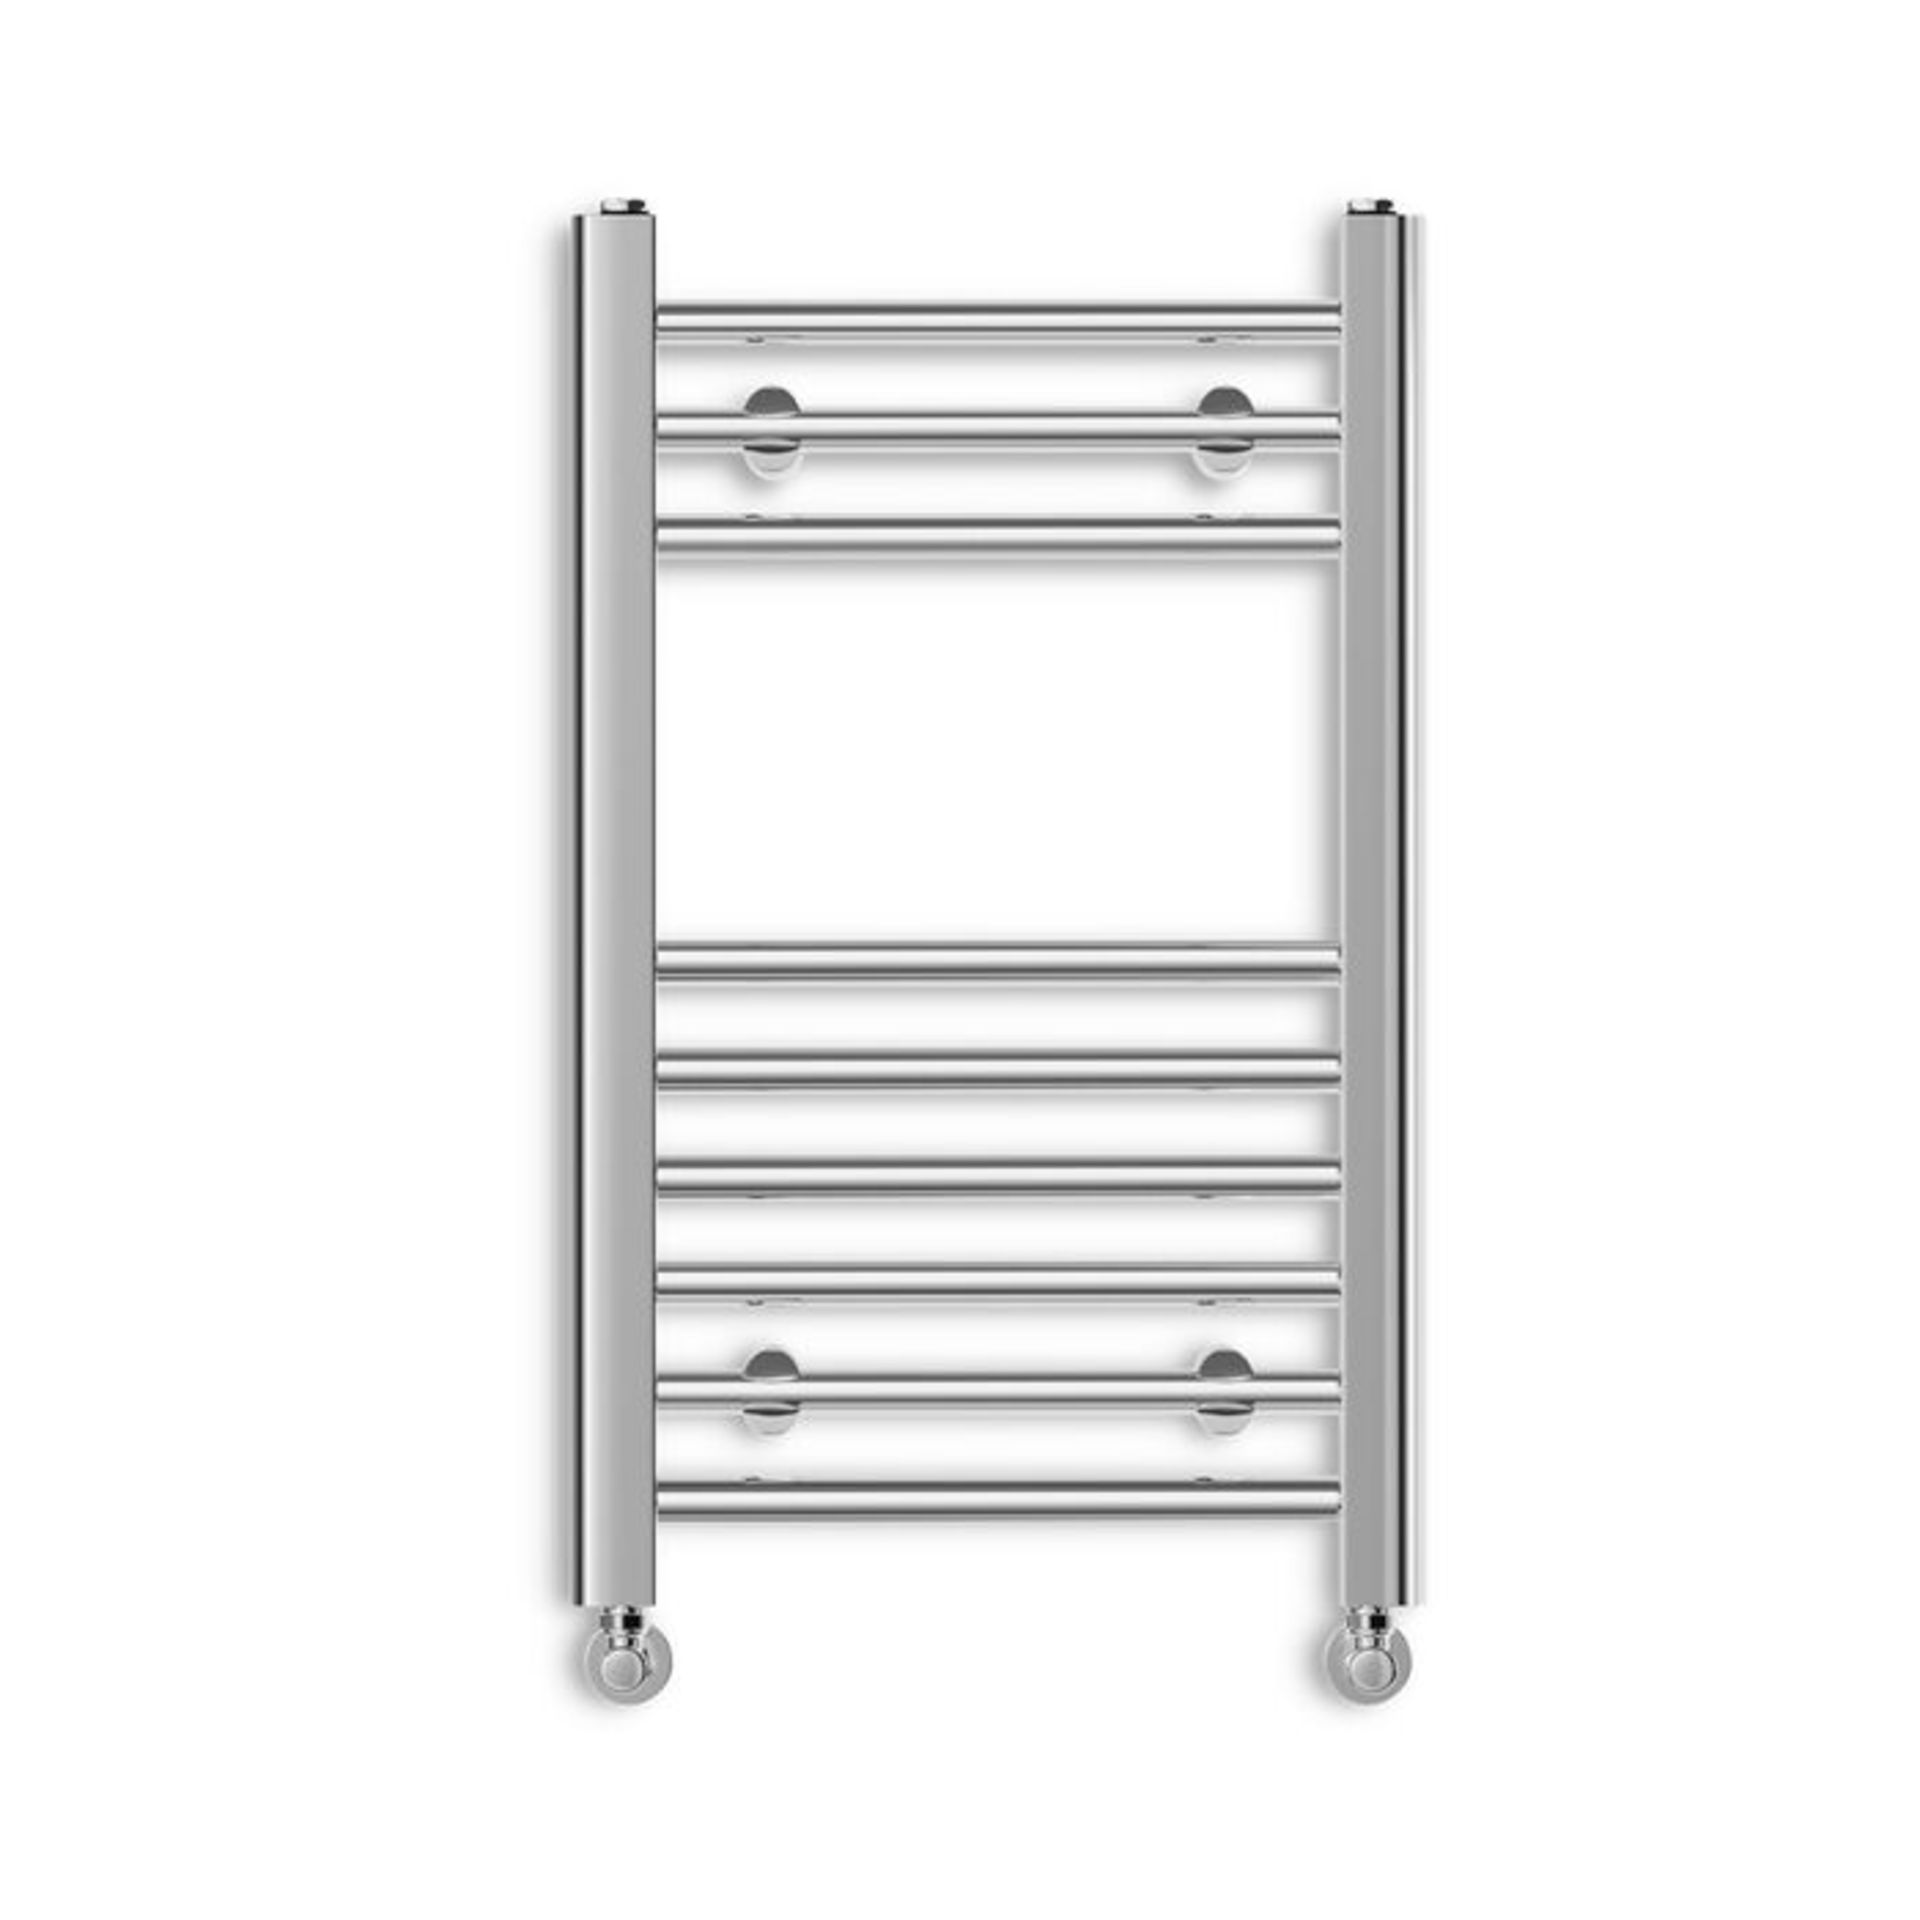 (PM96) 650x400mm Straight Heated Towel Radiator. This chrome towel radiator offers ultimate s... - Image 2 of 2